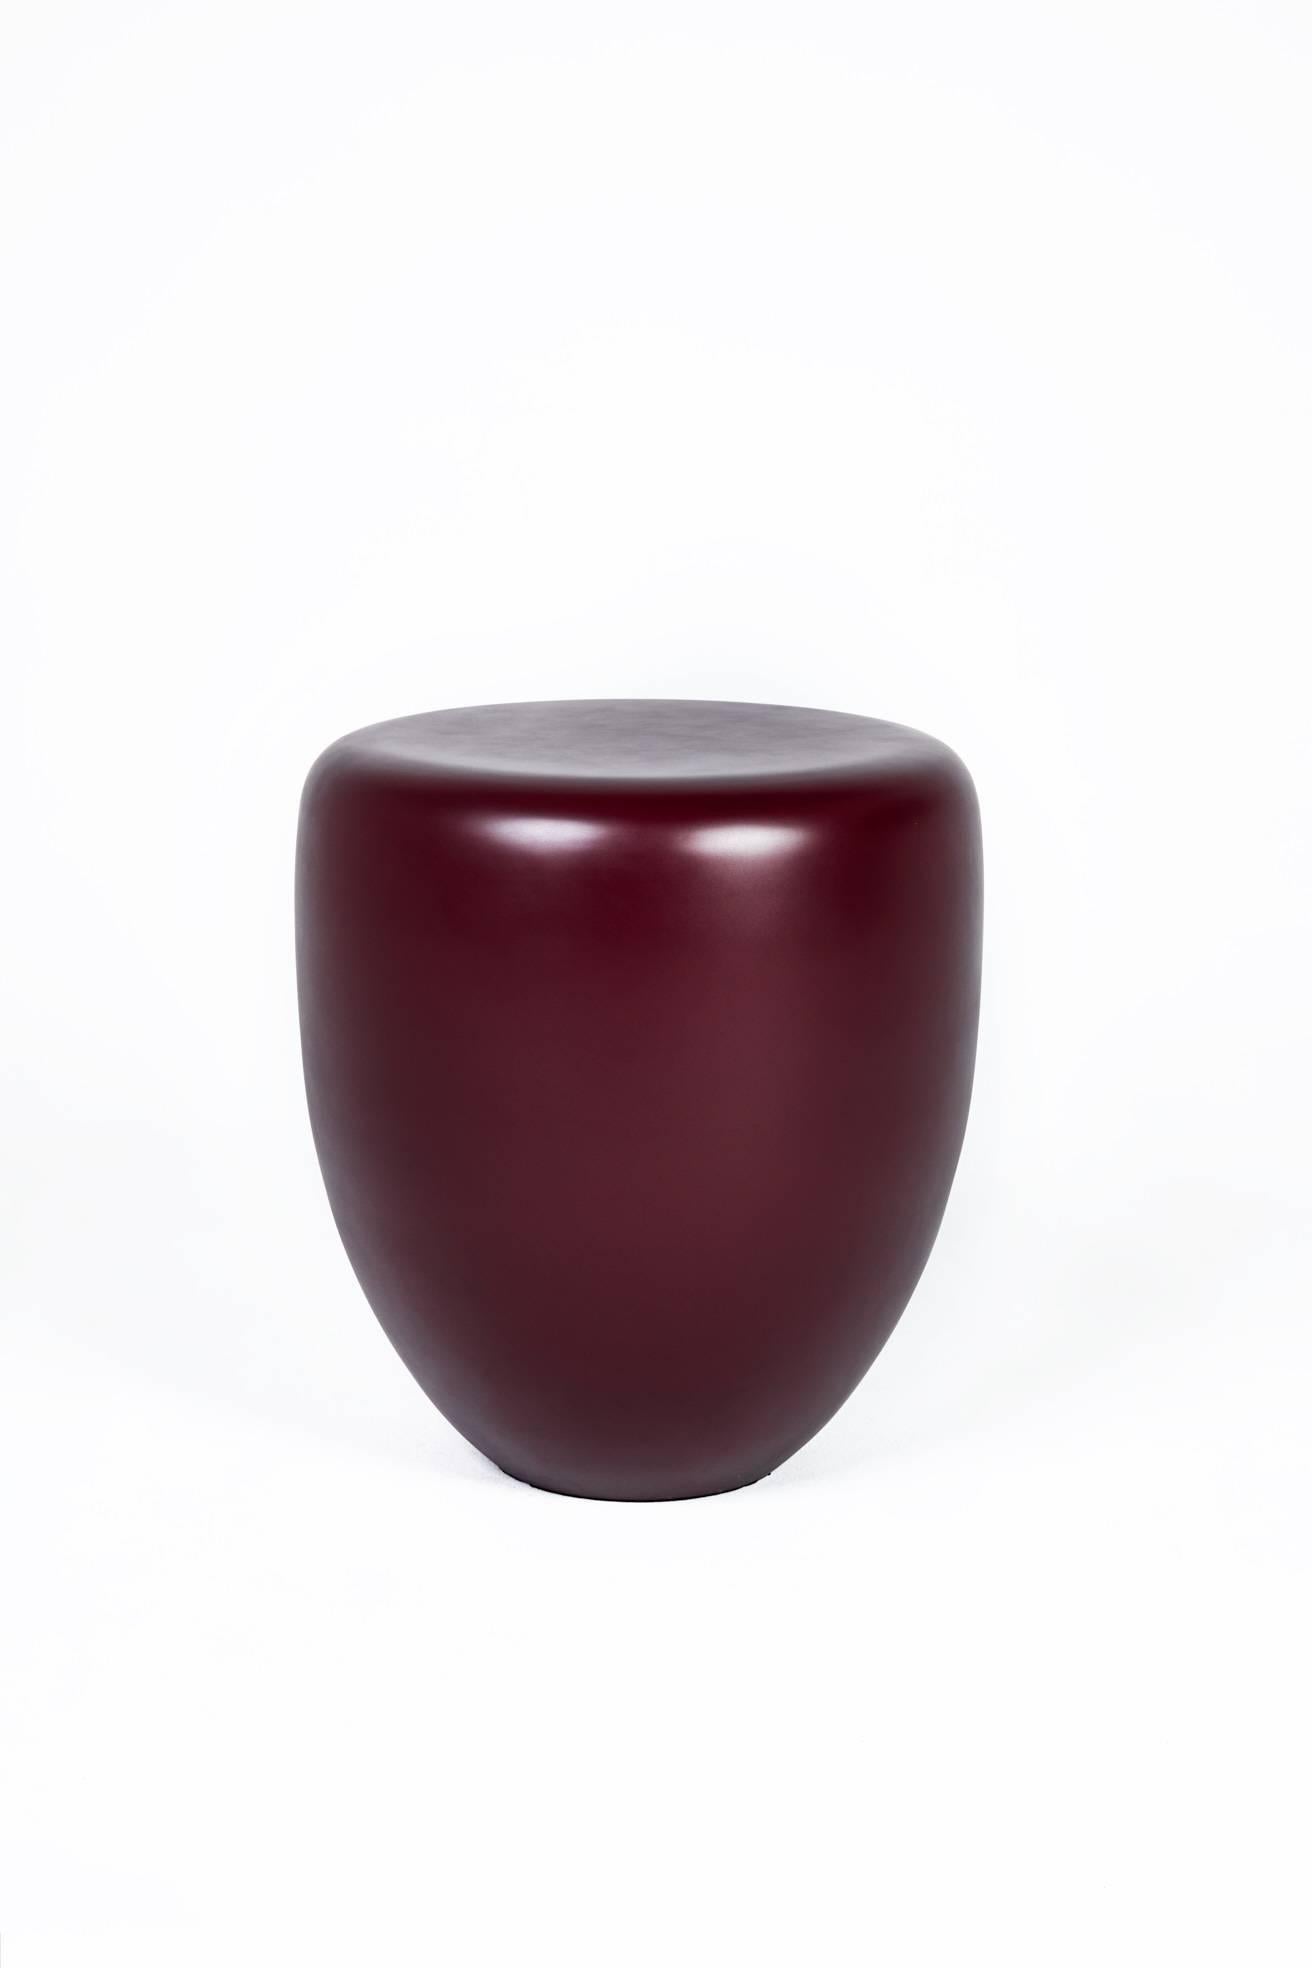 Vietnamese Side Table, Deep Garnet DOT by Reda Amalou, 2018 - Glossy or matt lacquer For Sale